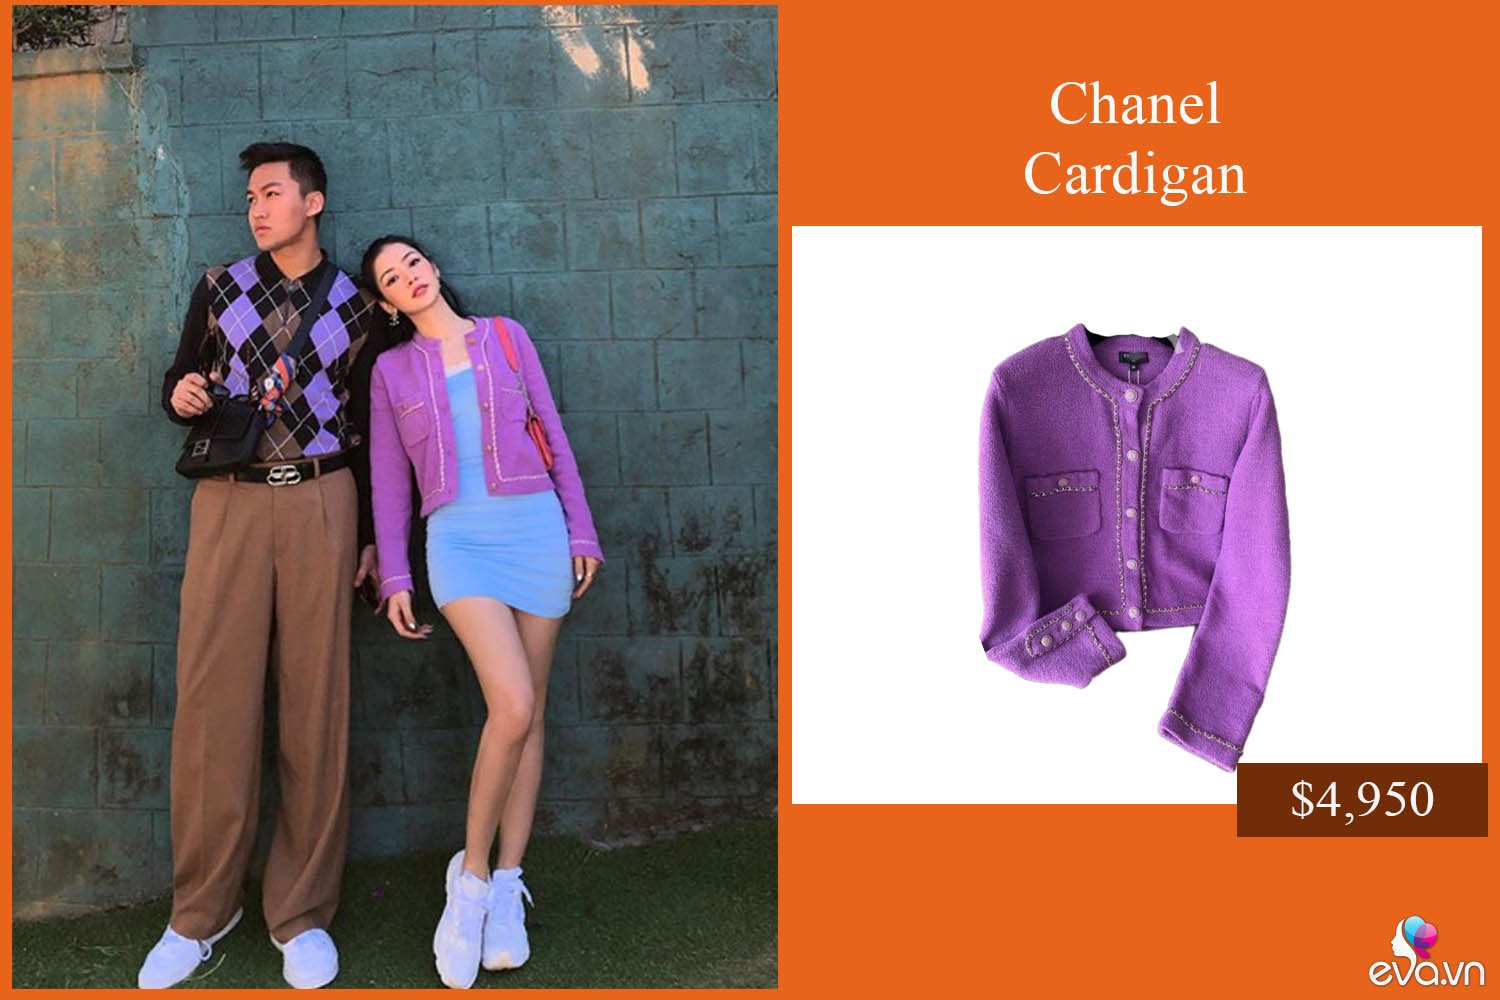 han quoc co jennie, viet nam co chi pu tham vong tro thanh “quy co chanel” - 3